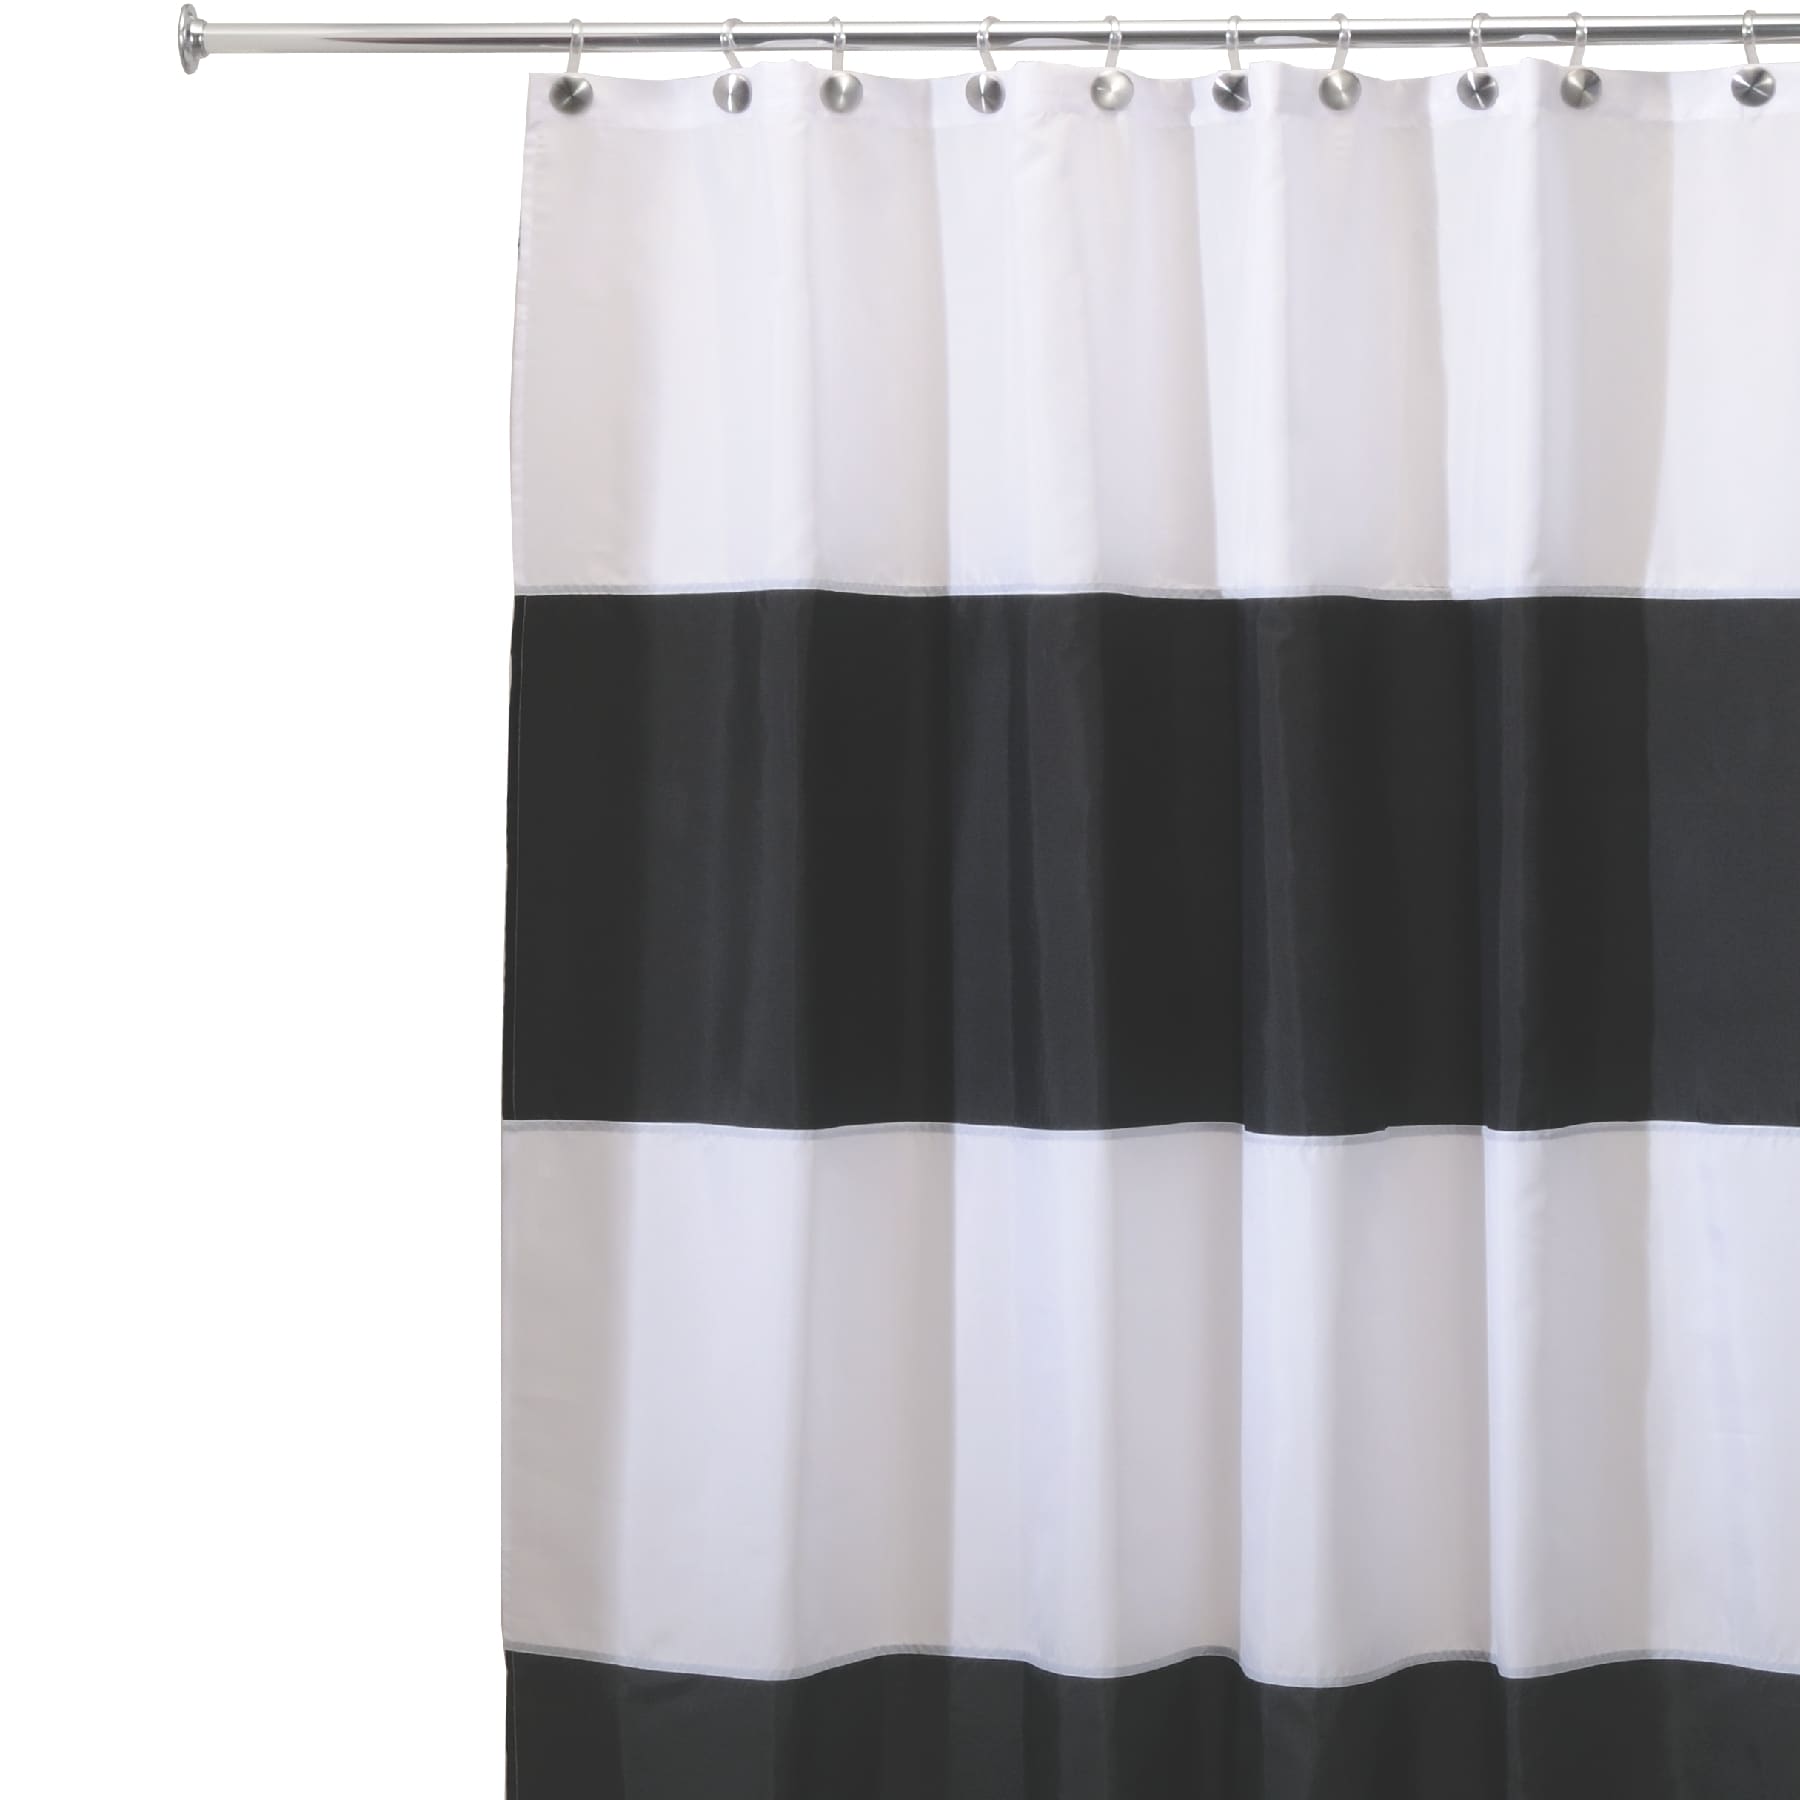 MorNon Fabric Shower Curtain Plain With Weighted Hem With 12 Hooks Rings Extra Long Polyester Waterproof Bathroom Curtain Black 